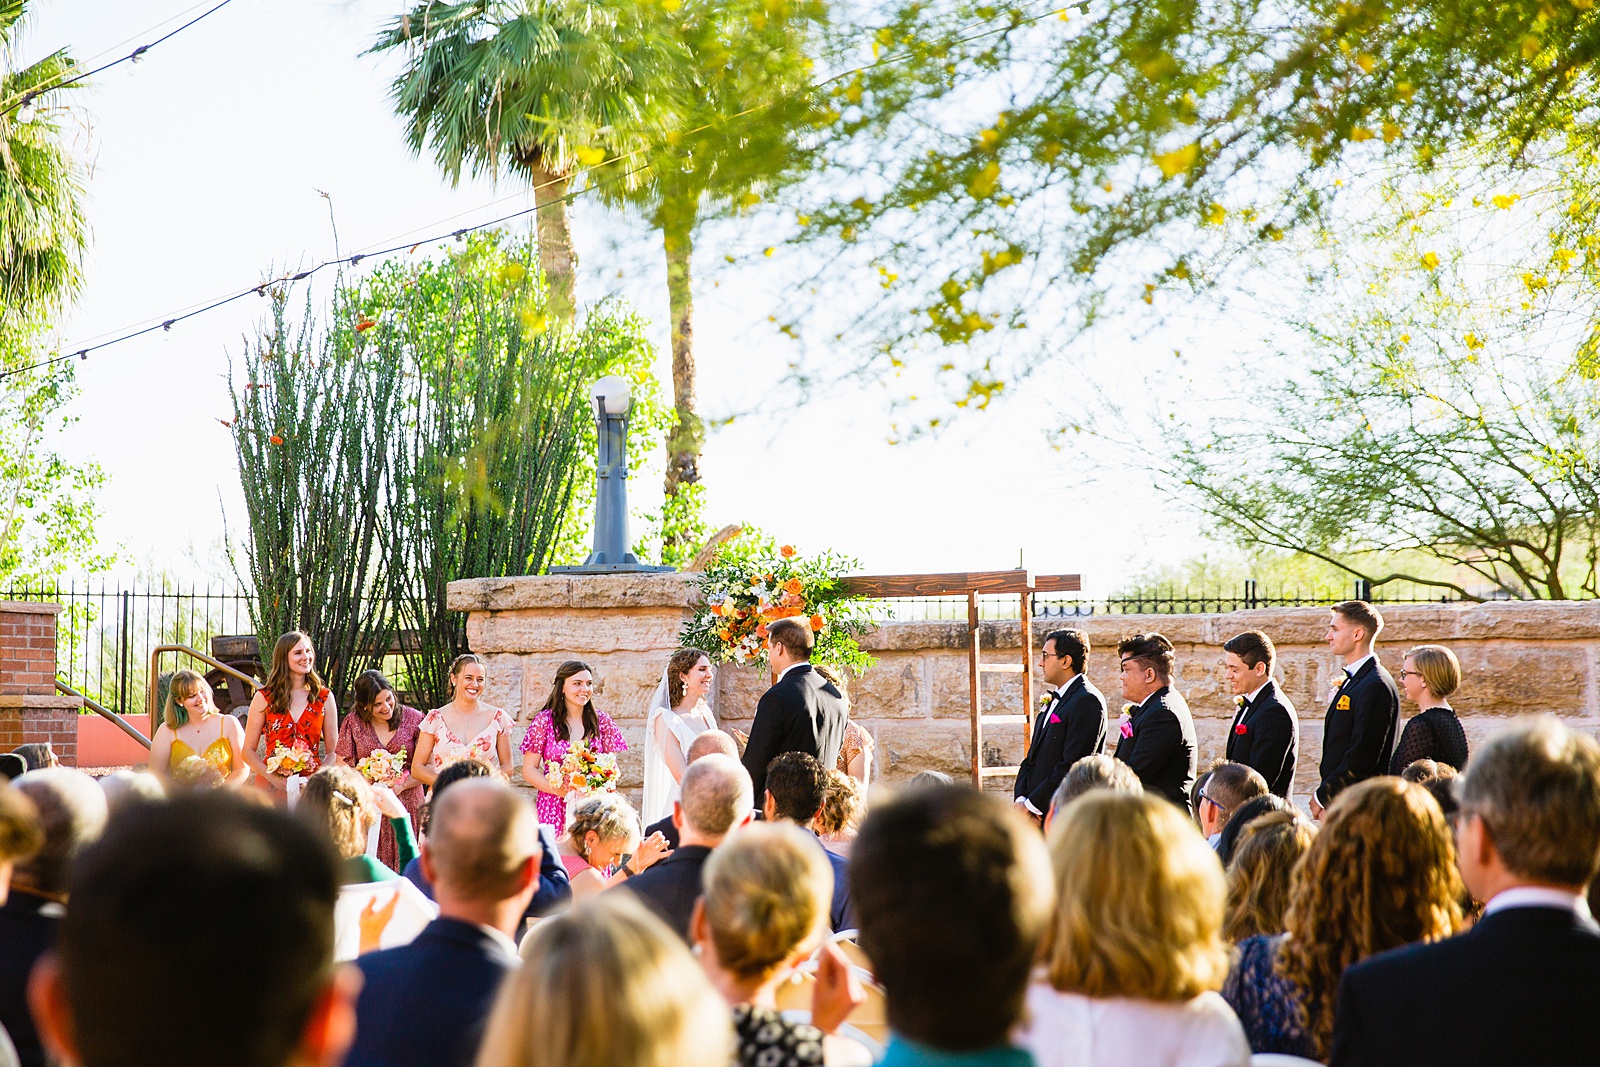 Bride looking at her groom during their wedding ceremony at Arizona Historical Society by Tempe wedding photographer PMA Photography.